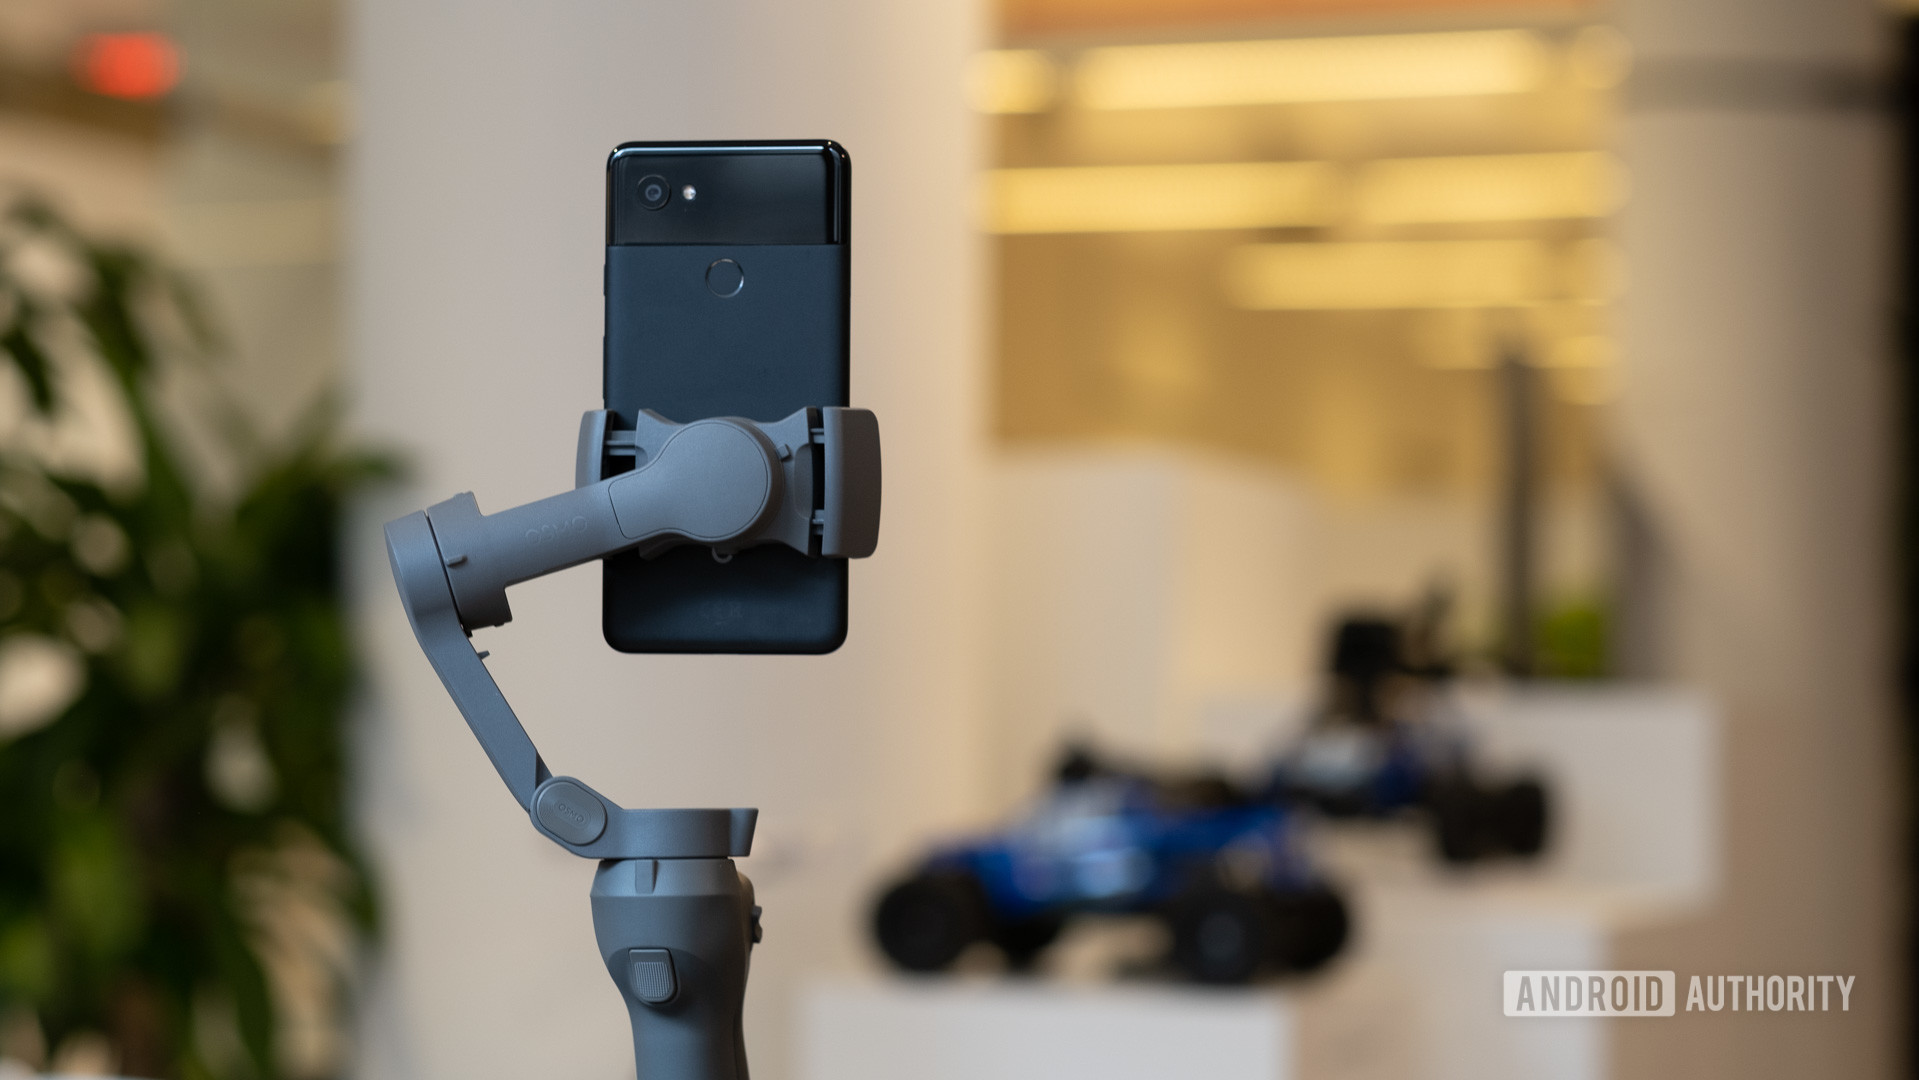 DJI Osmo Mobile 3 gimbal is foldable, USB-C powered - Android Authority